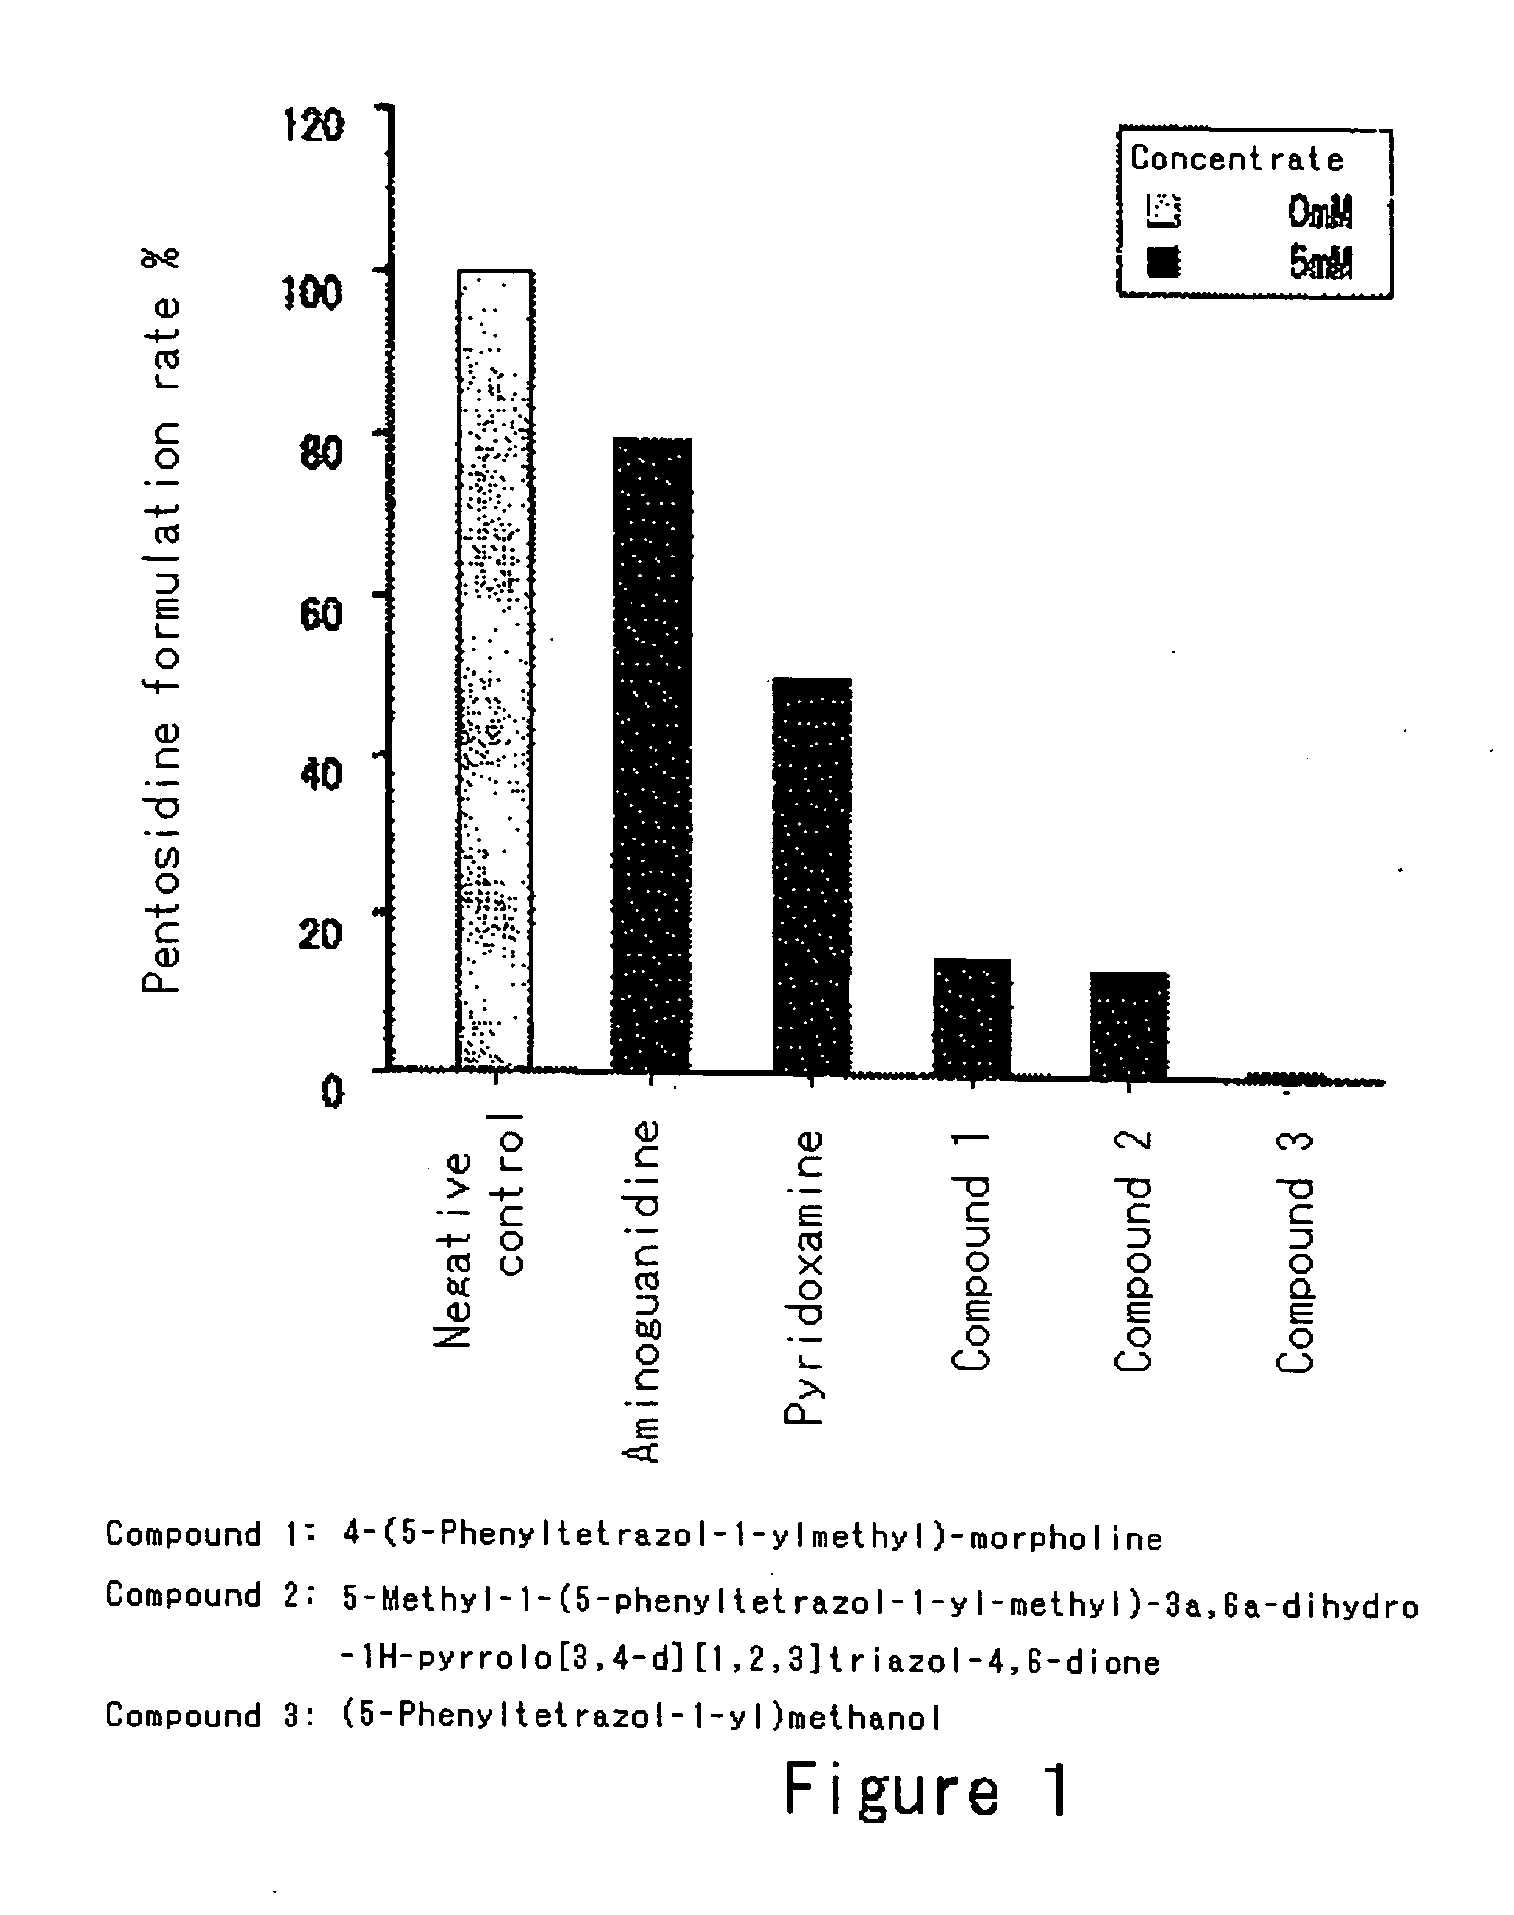 Modified-protein formation inhibitor